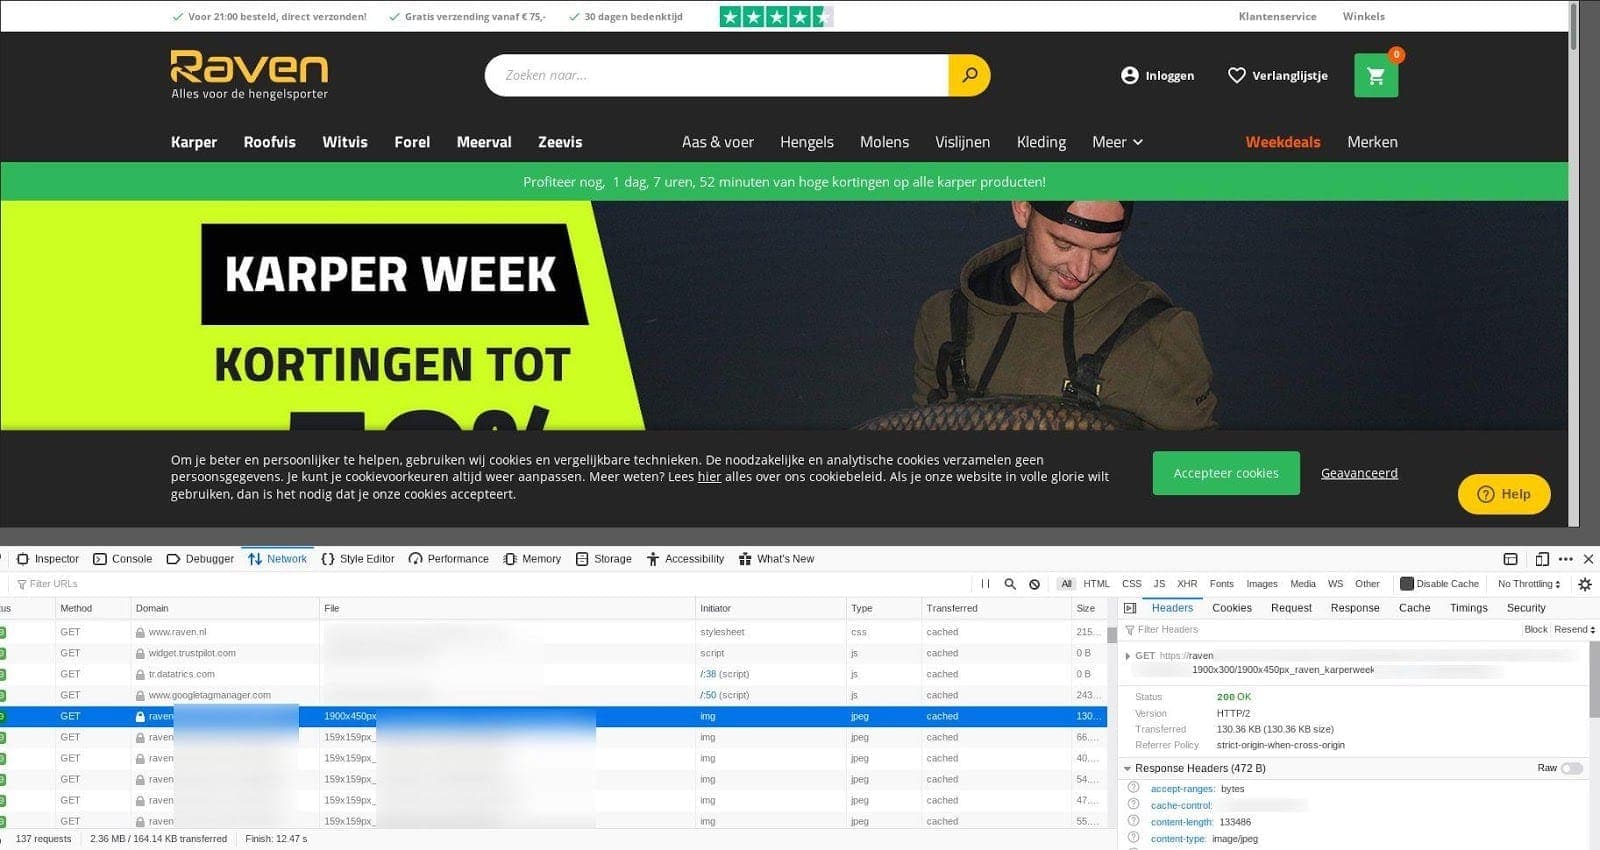 , Dutch Fishing Outlet Exposes Hundreds of Thousands of Customers, The Cyber Post